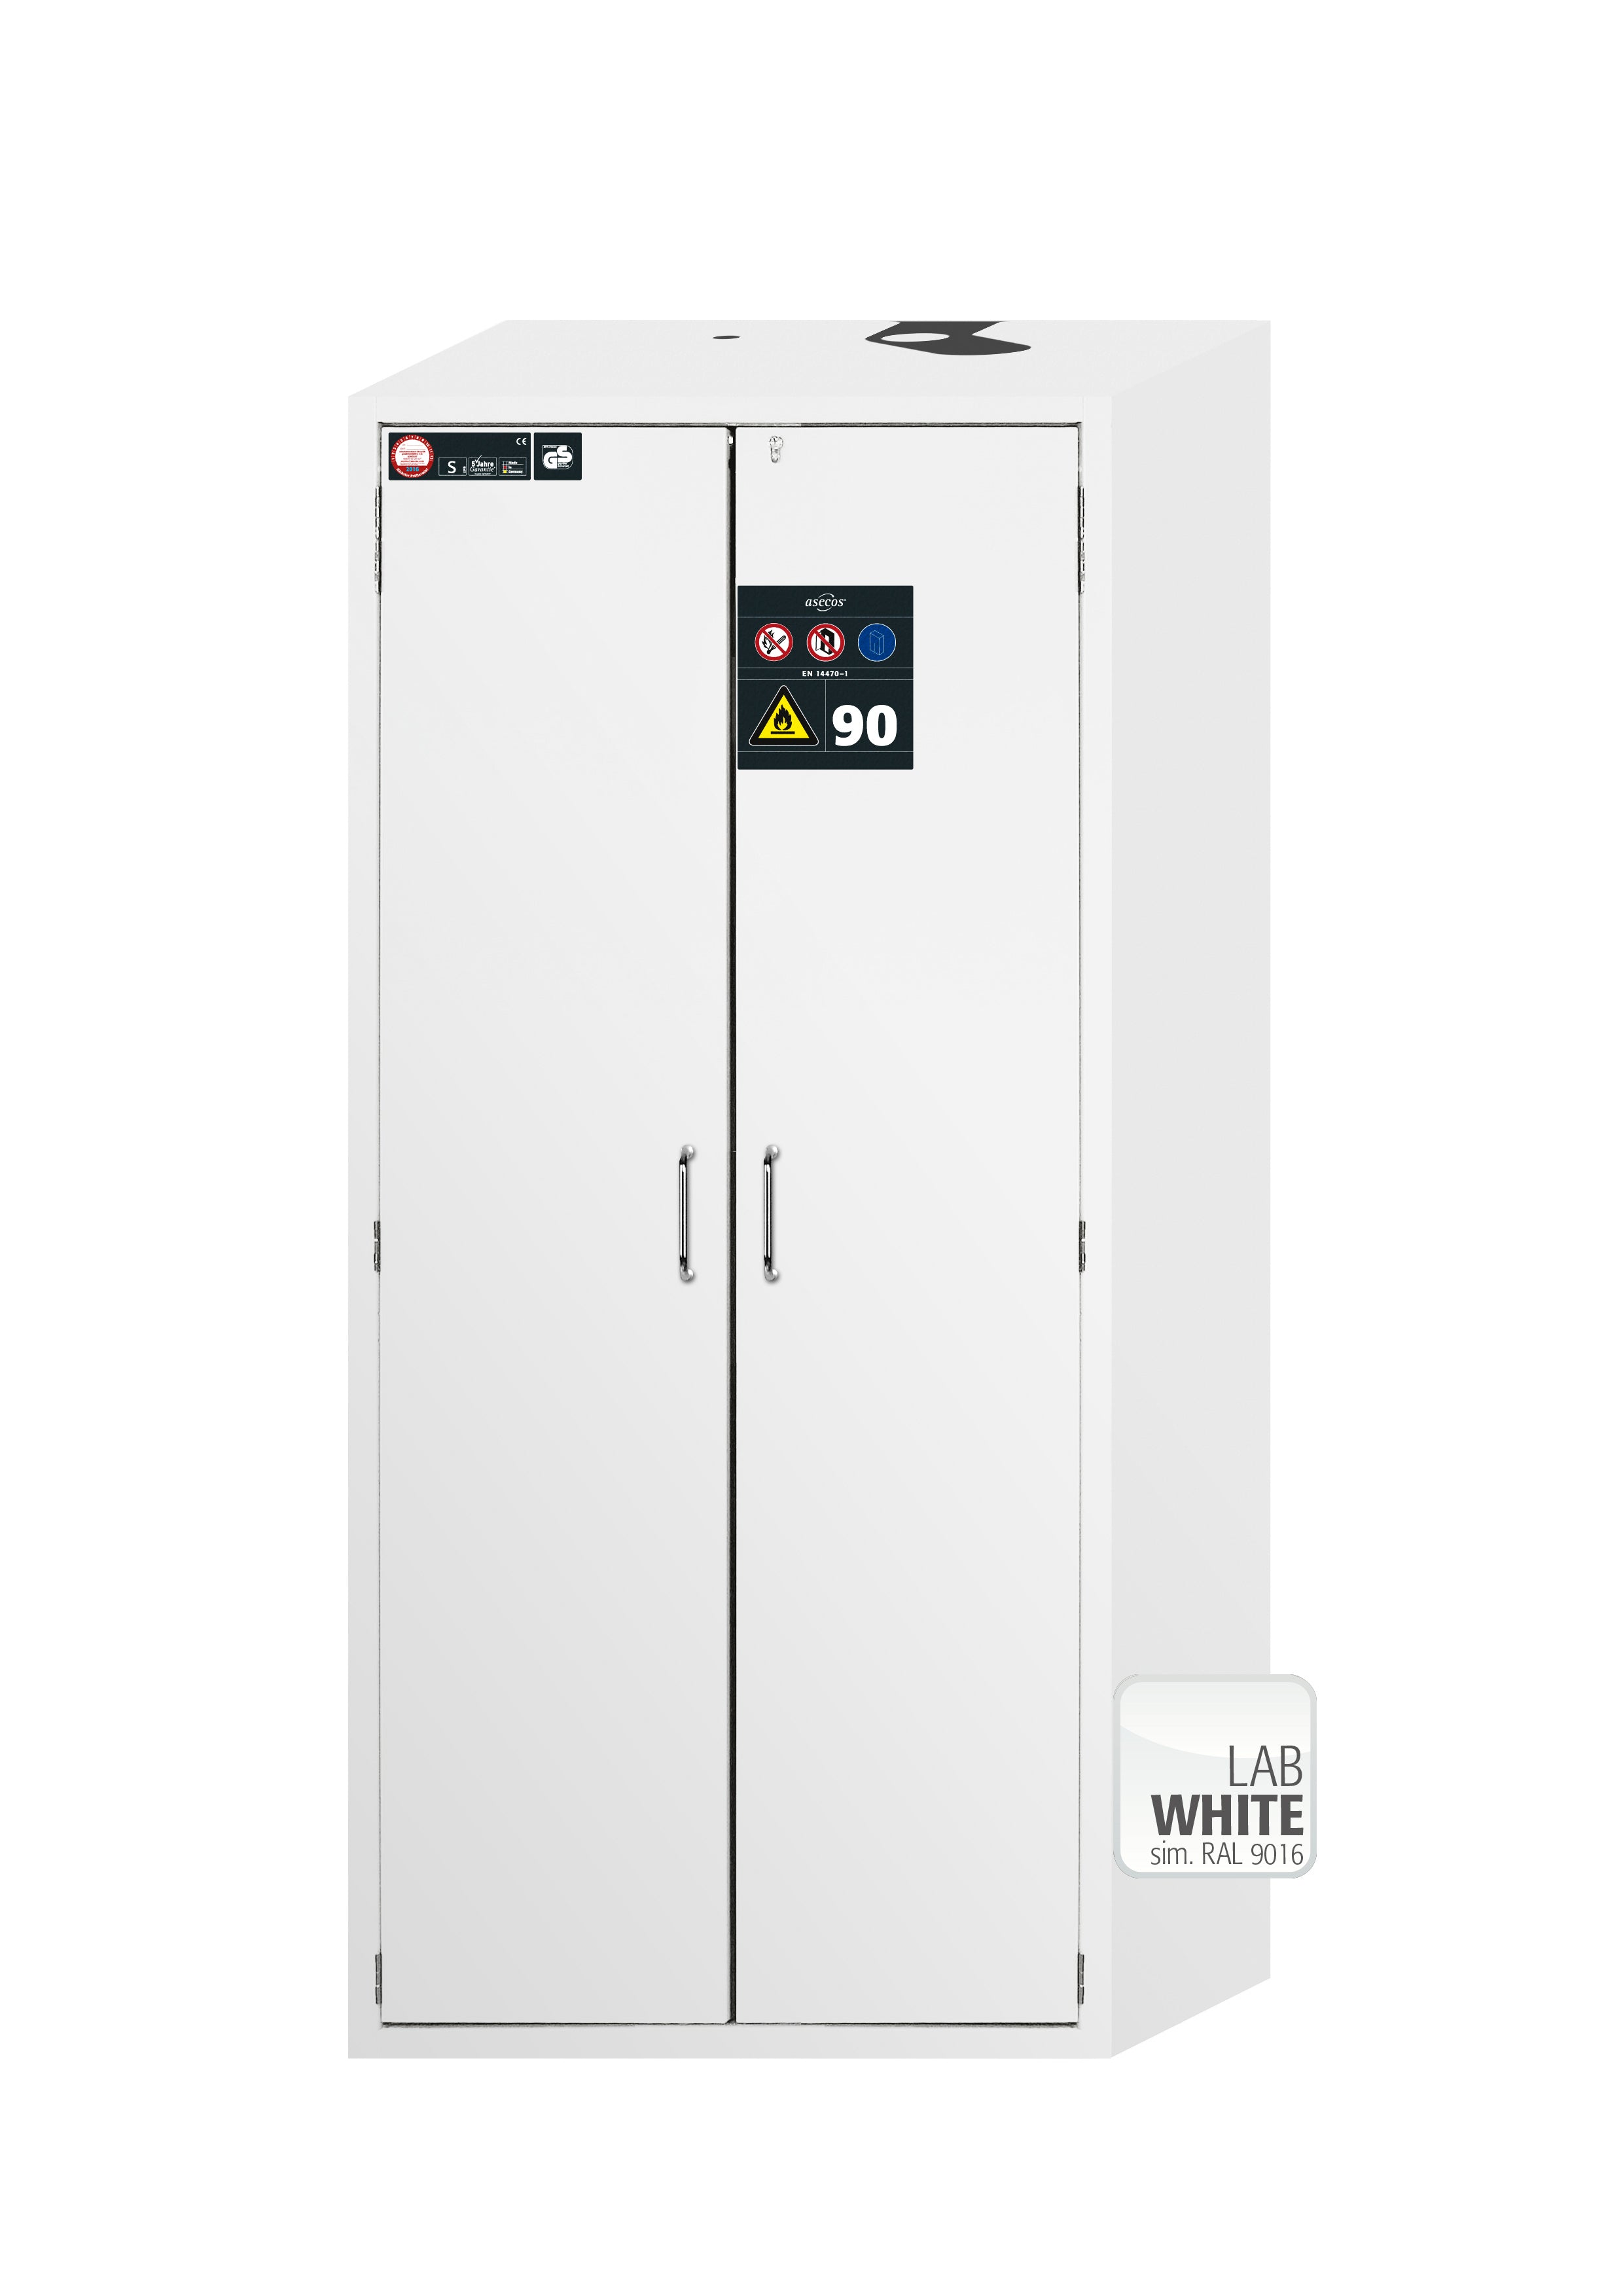 Type 90 safety cabinet S-CLASSIC-90 model S90.196.090.WDAS in laboratory white (similar to RAL 9016) with 5x standard pull-out tray (sheet steel)